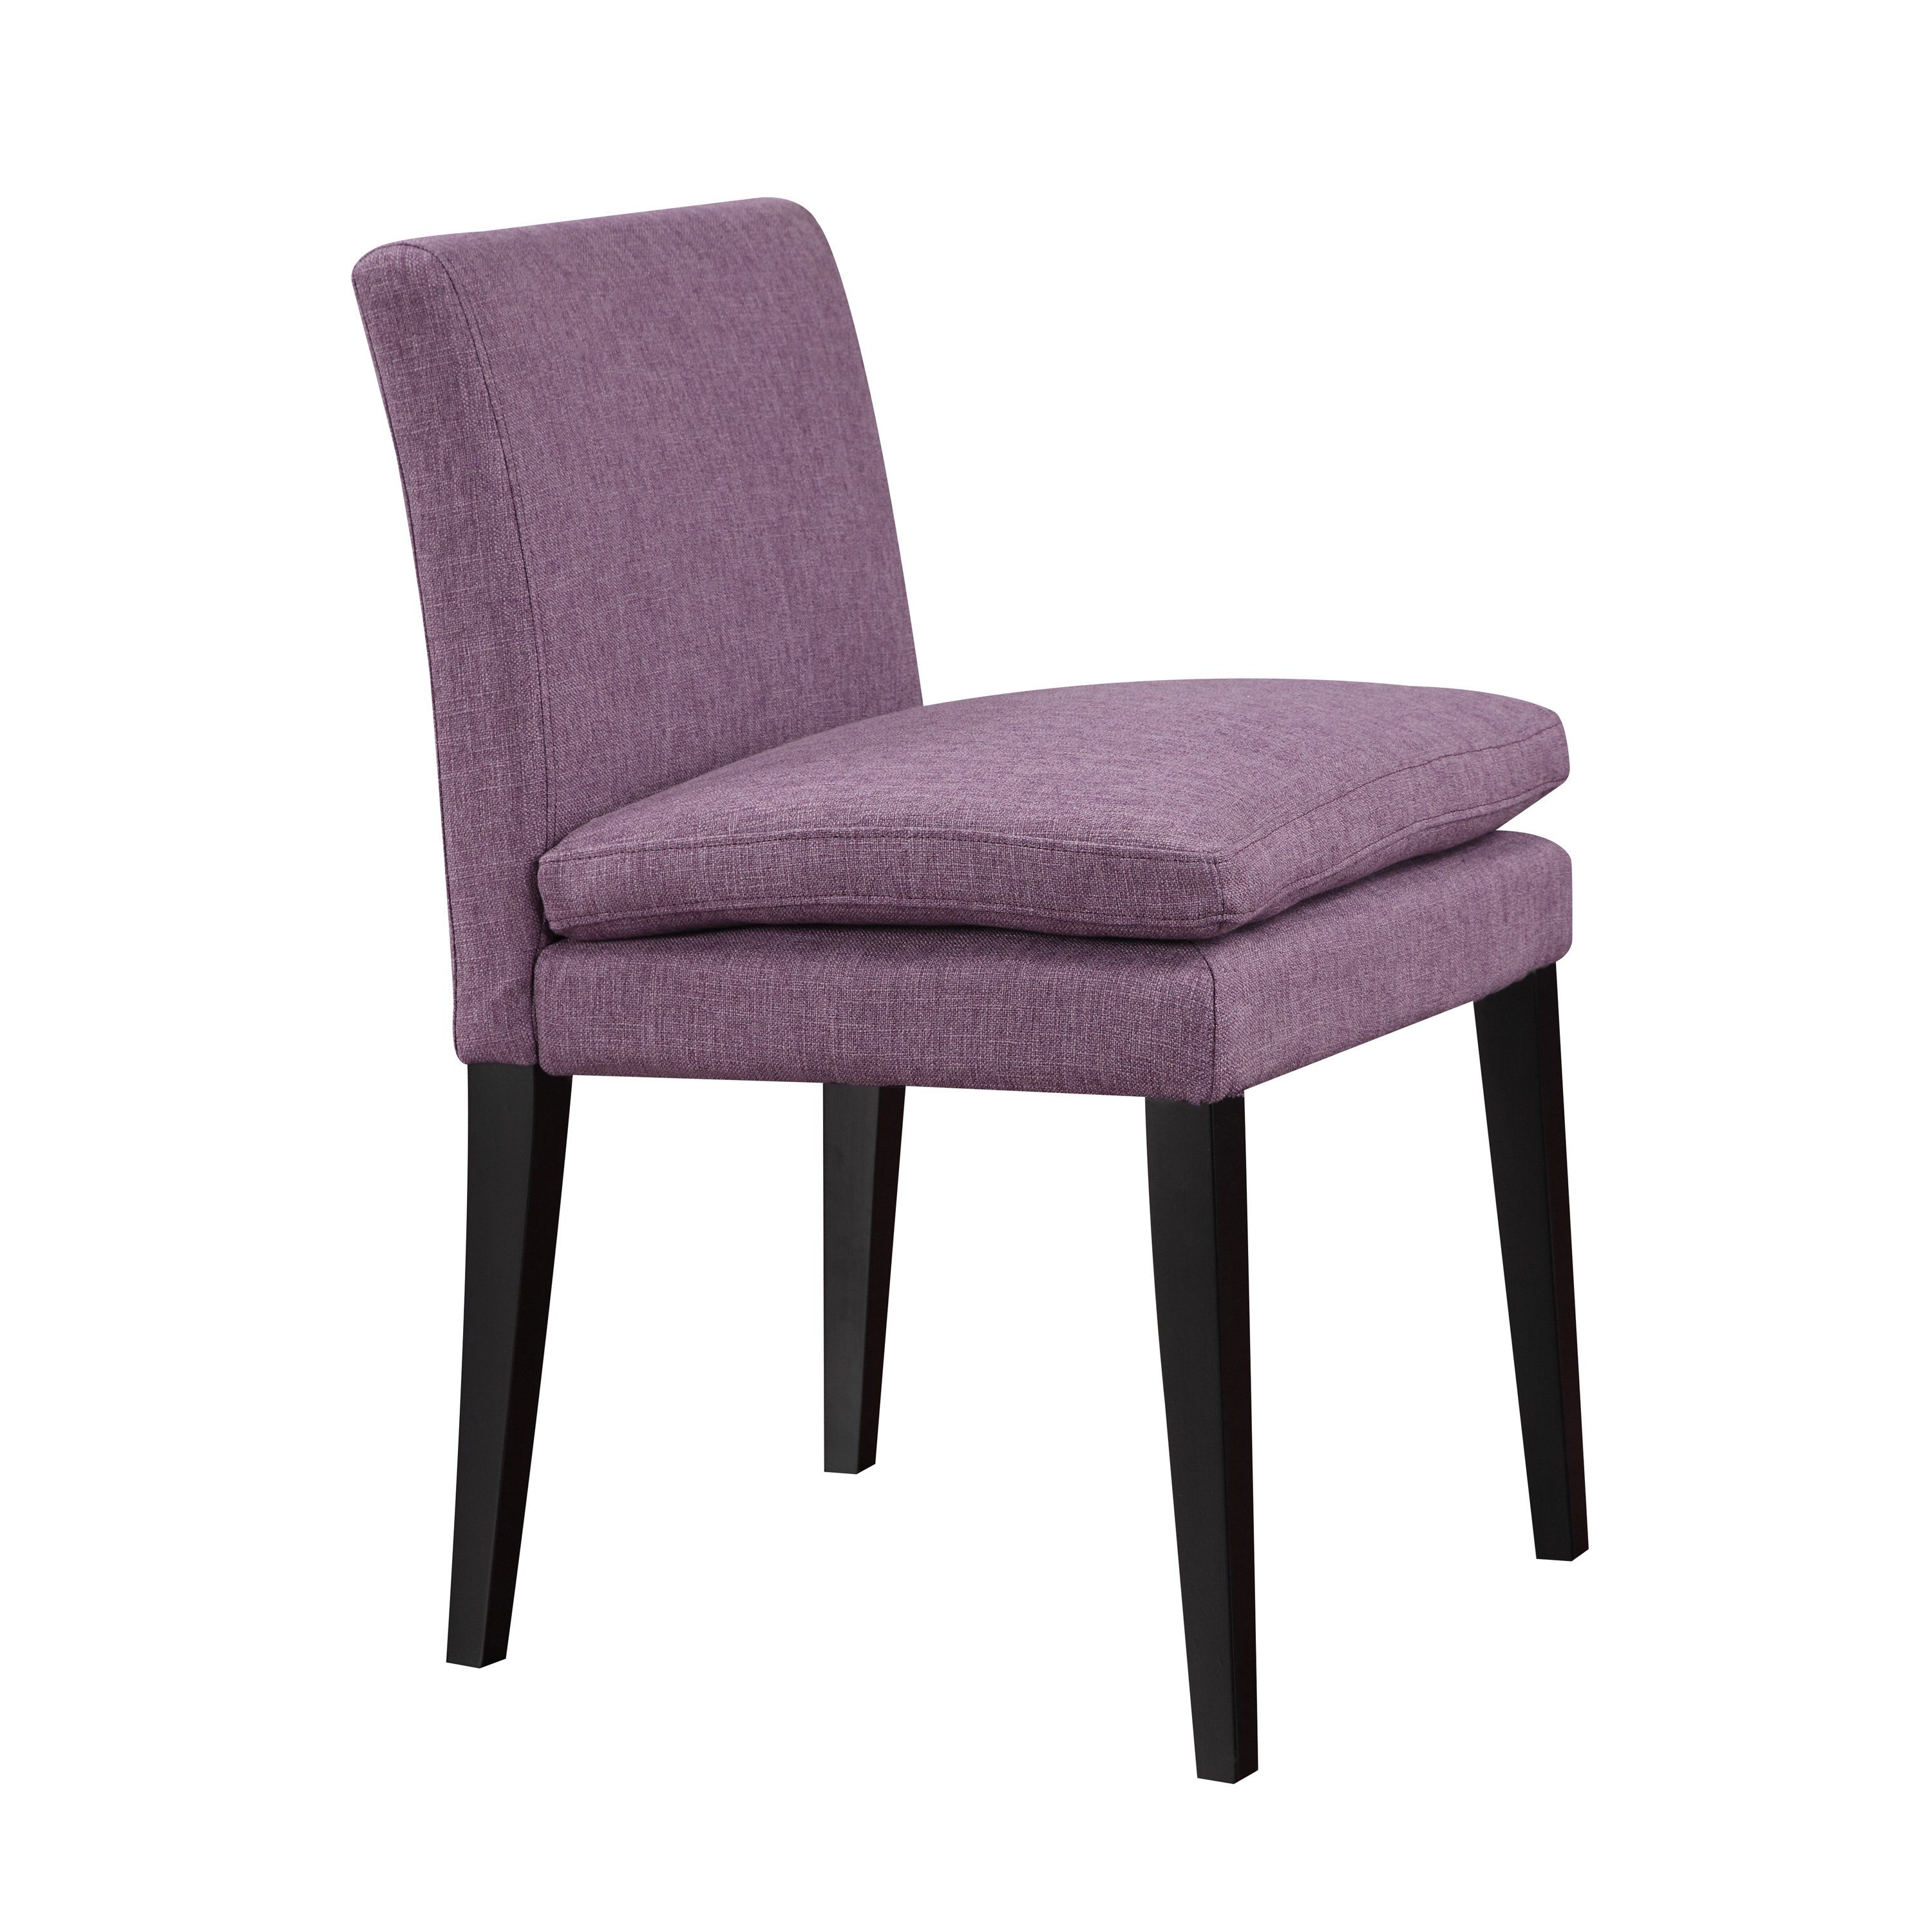 Orion Side Chairs Regarding Best And Newest Shop Handy Living Orion Amethyst Purple Linen Upholstered Dining (View 15 of 20)